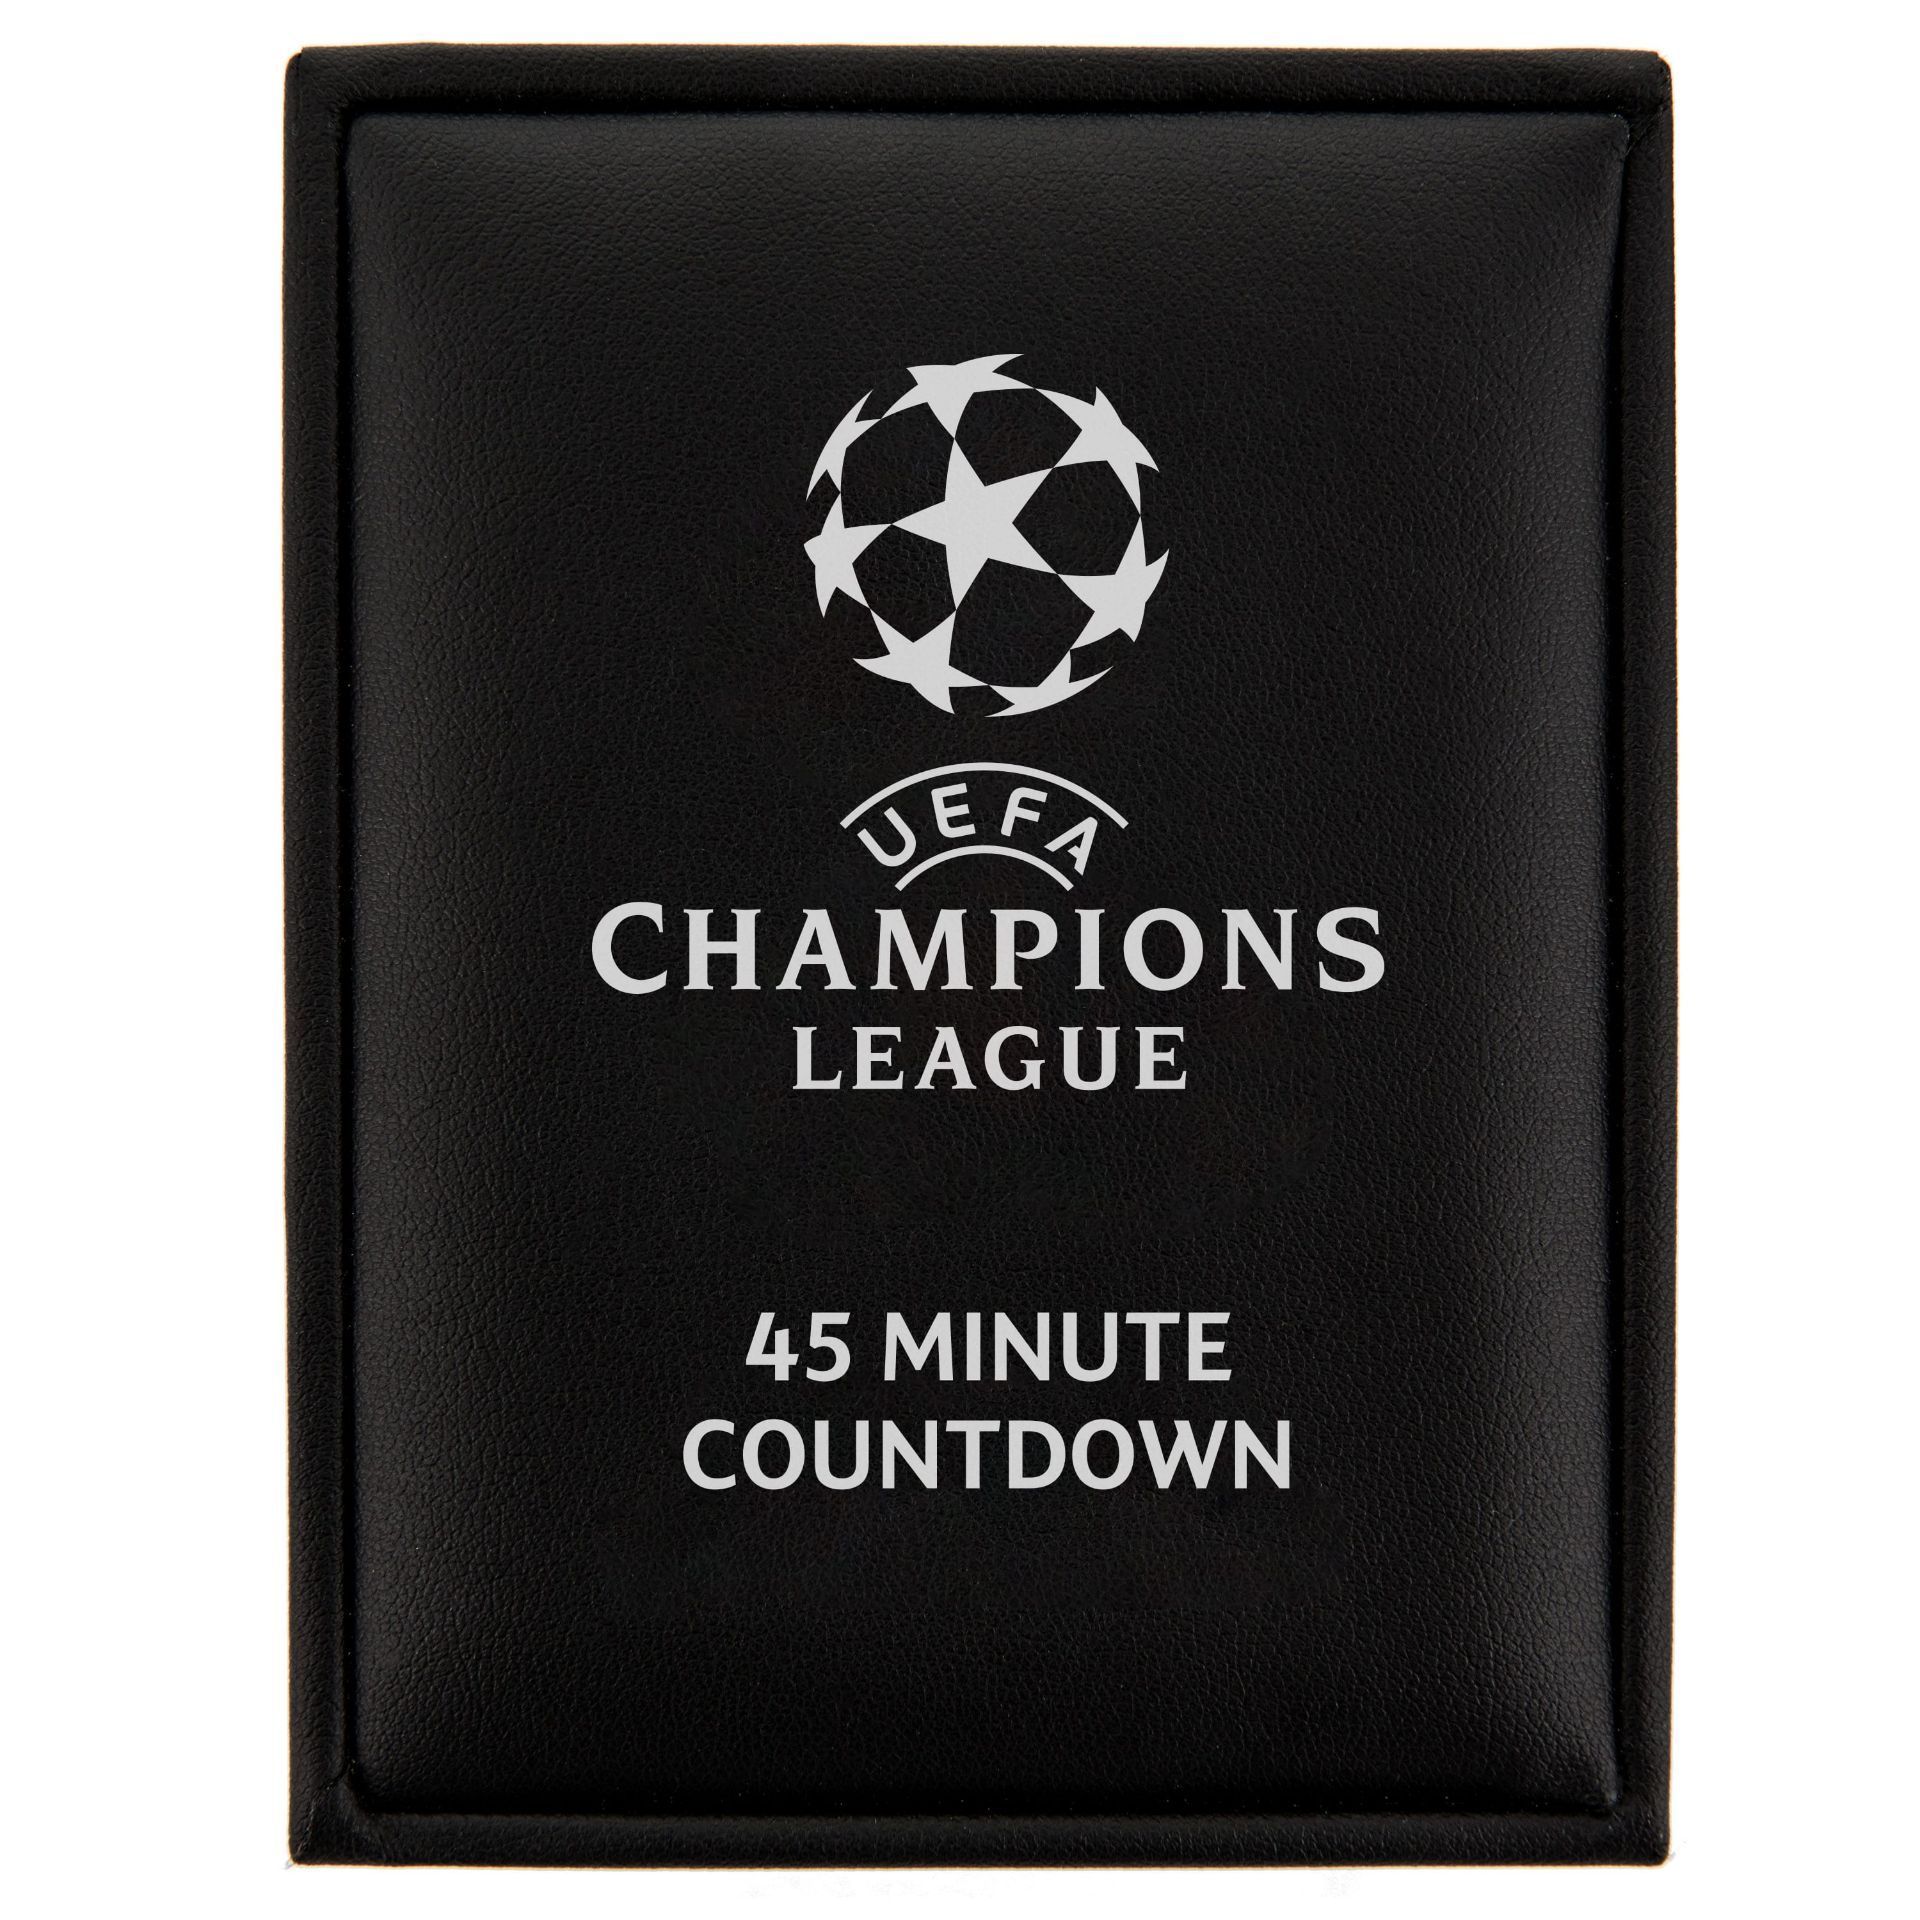 BULK LOT OF 19 x BRAND NEW OFFICIAL UEFA CHAMPIONS LEAGUE 45 MINUTE COUNTDOWN WATCH CL45-STB-GRBLP - Image 5 of 5